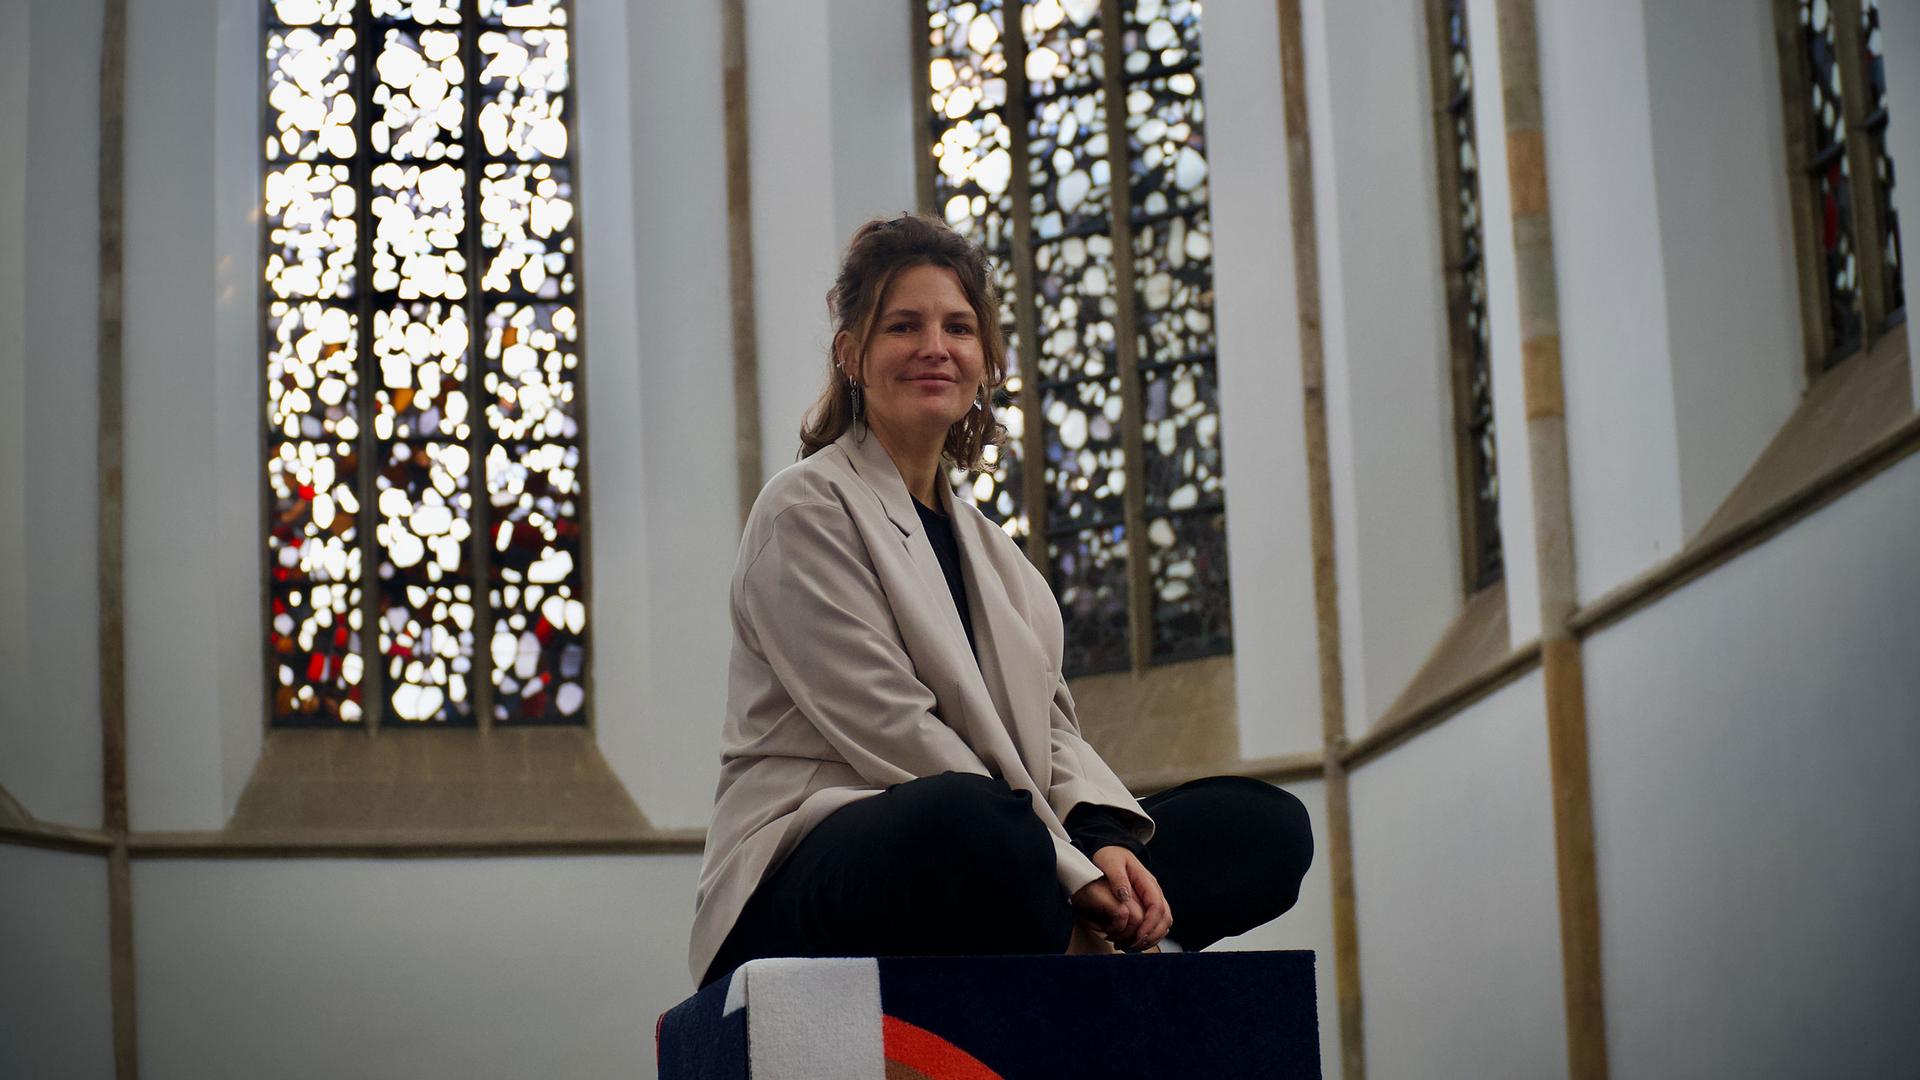 Kunsthalle Osnabrück co-director Anna Jehle sits near colorful stained-glass windows inside a church.